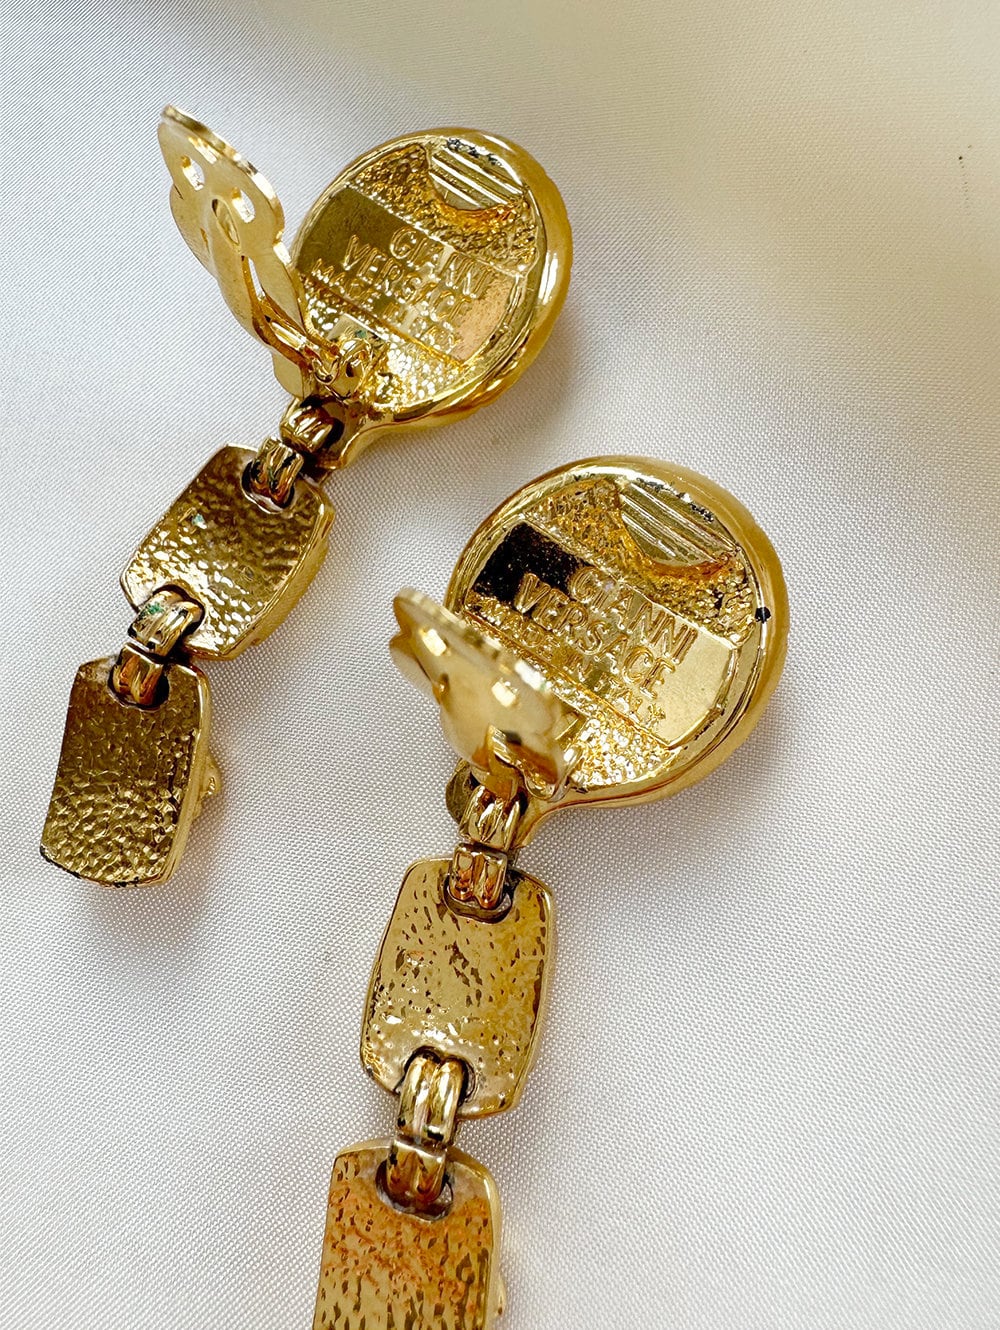 Gianni Versace - Authenticated Earrings - Gold Plated Gold for Women, Good Condition